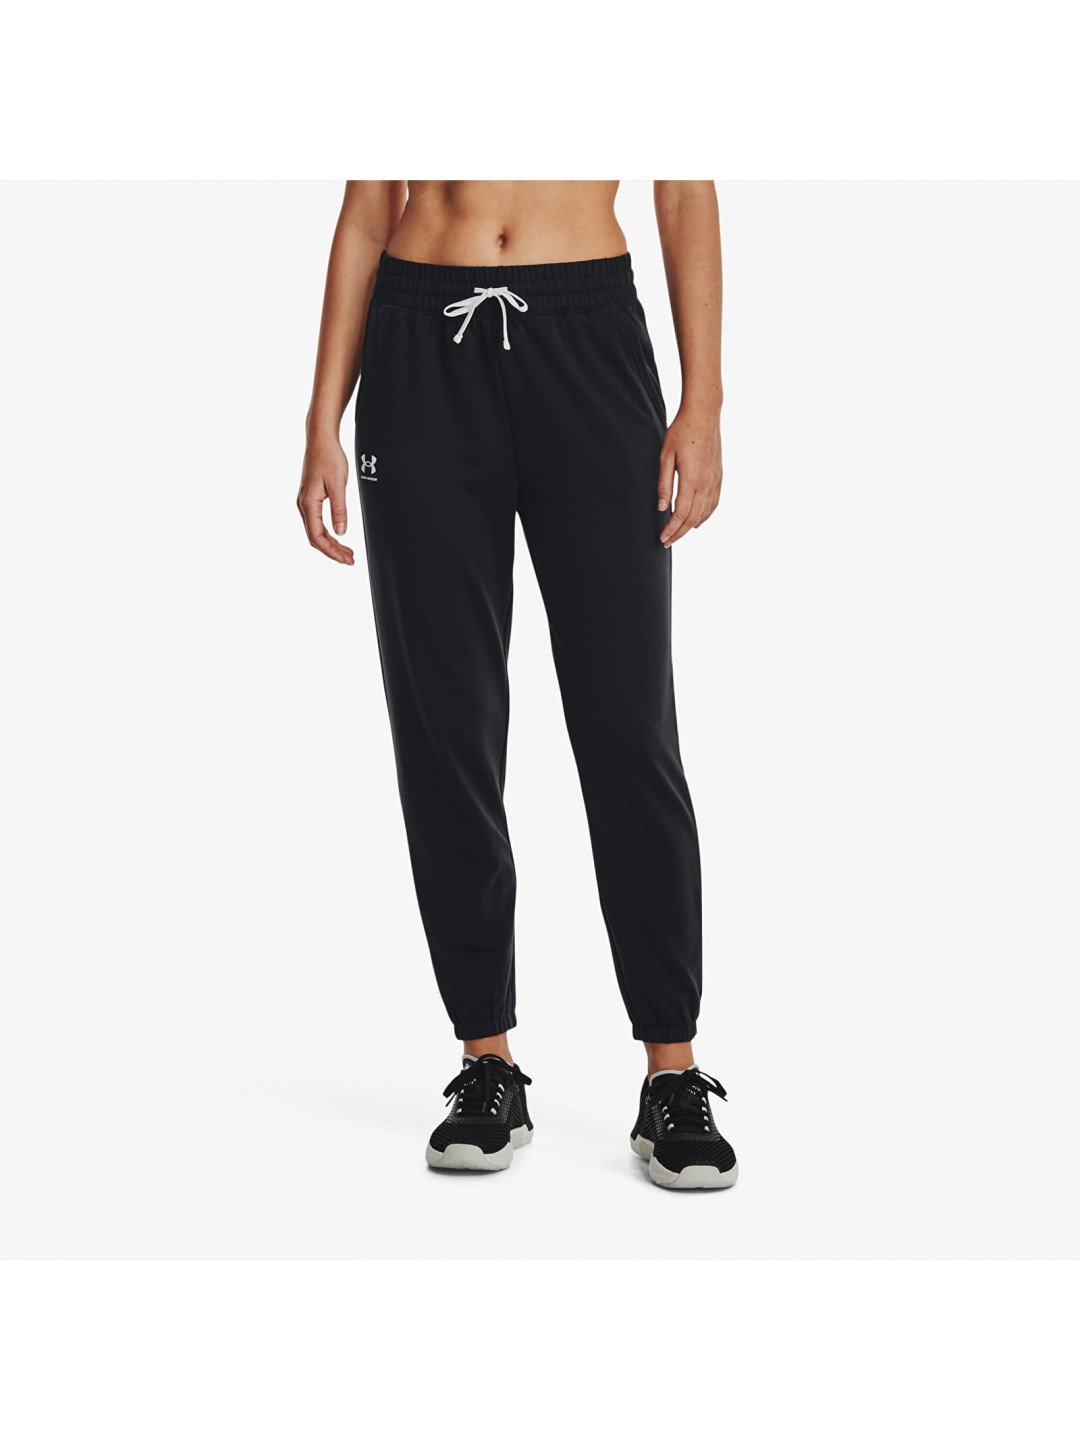 Under Armour Rival Terry Jogger Black